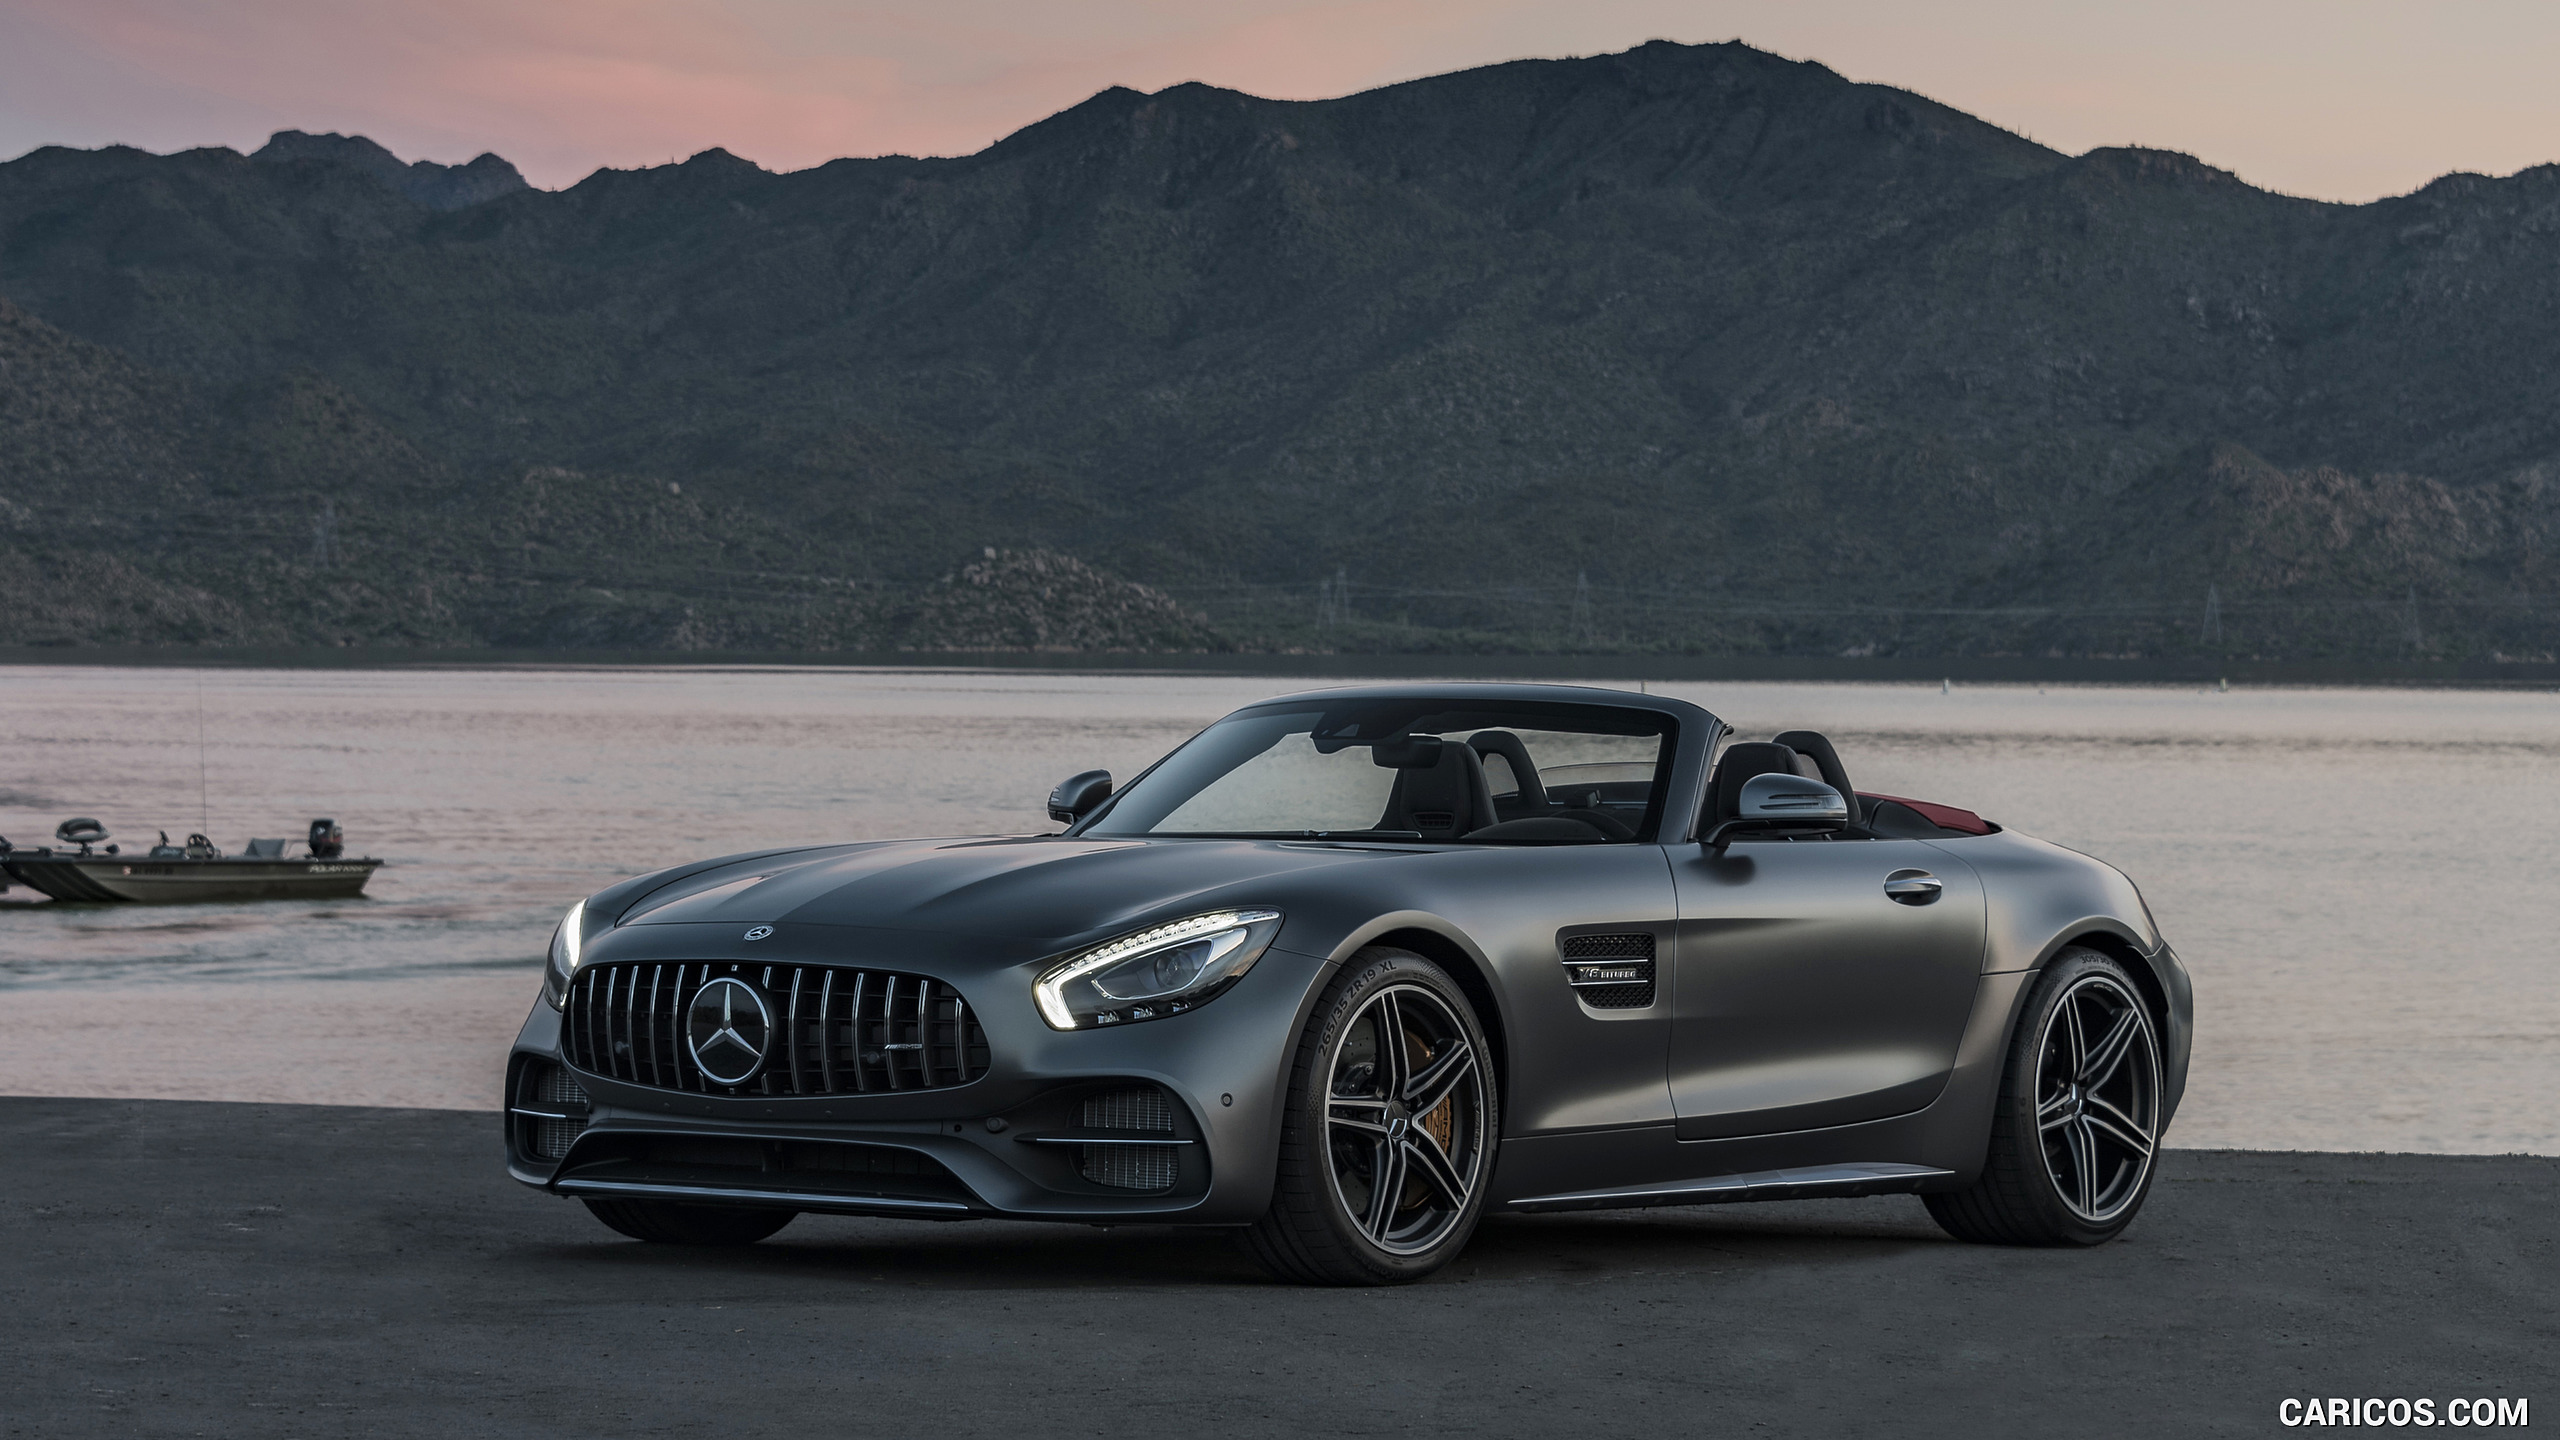 2018 Mercedes-AMG GT C Roadster - Front Three-Quarter, #330 of 350